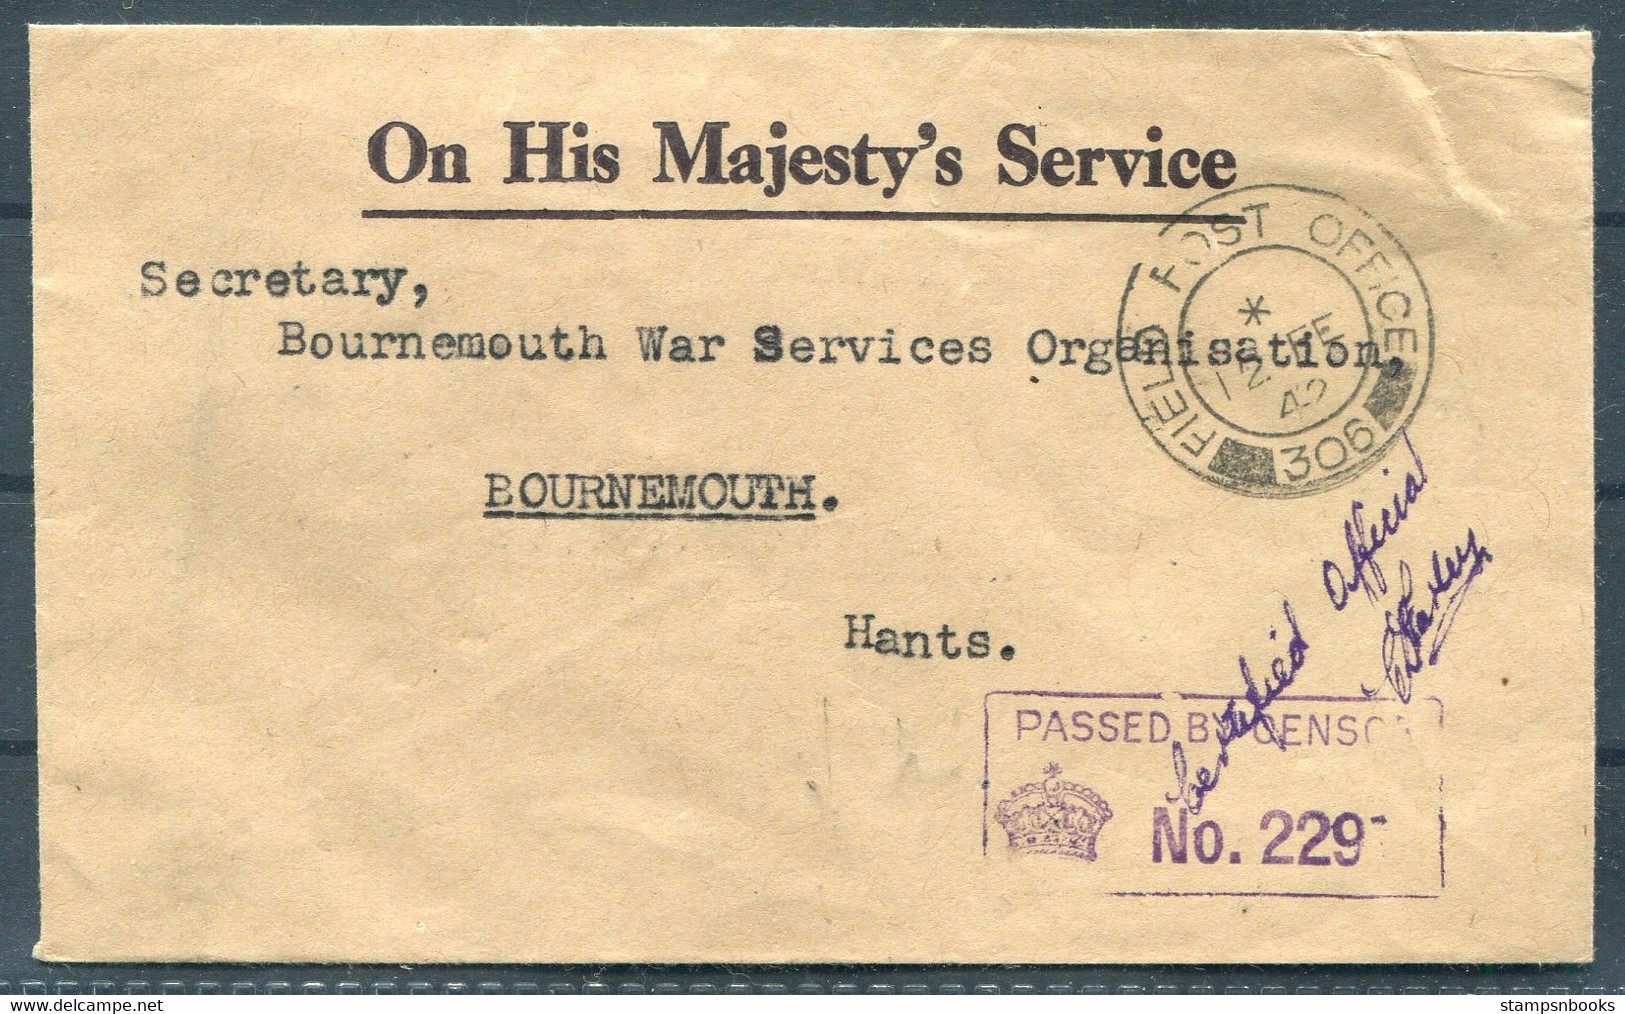 1942 Iceland Field Post Office FPO 306 O.H.M.S. "Certified Official" Censor Cover, Bournemouth War Service Organisation - Briefe U. Dokumente